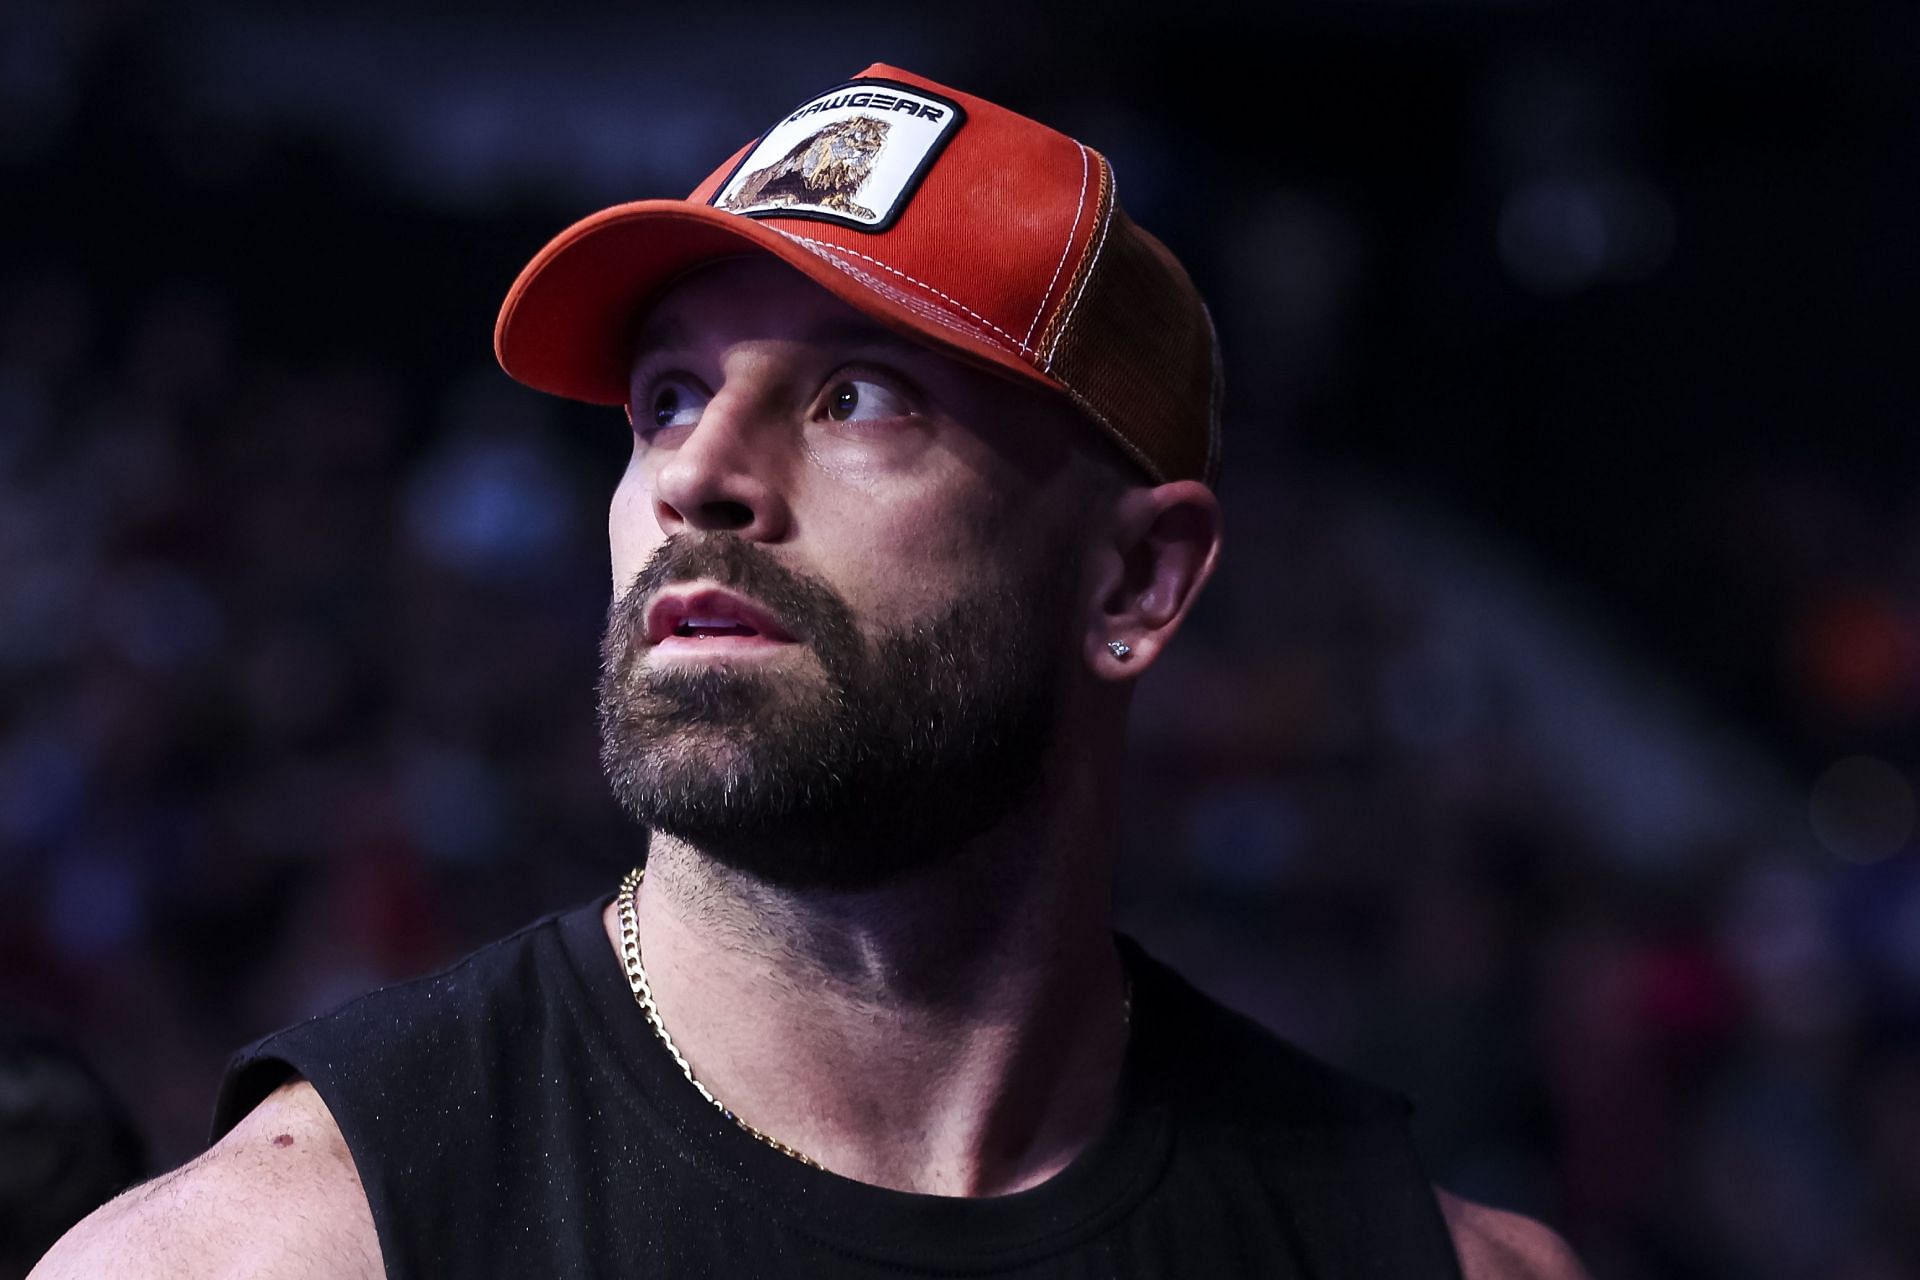 UFC 273: Volkanovski v The Korean: Bradley Martyn is seen in attendance during the UFC 273 event at VyStar Veterans Memorial Arena on April 09, 2022, in Jacksonville, Florida. (Photo by James Gilbert/Getty Images)